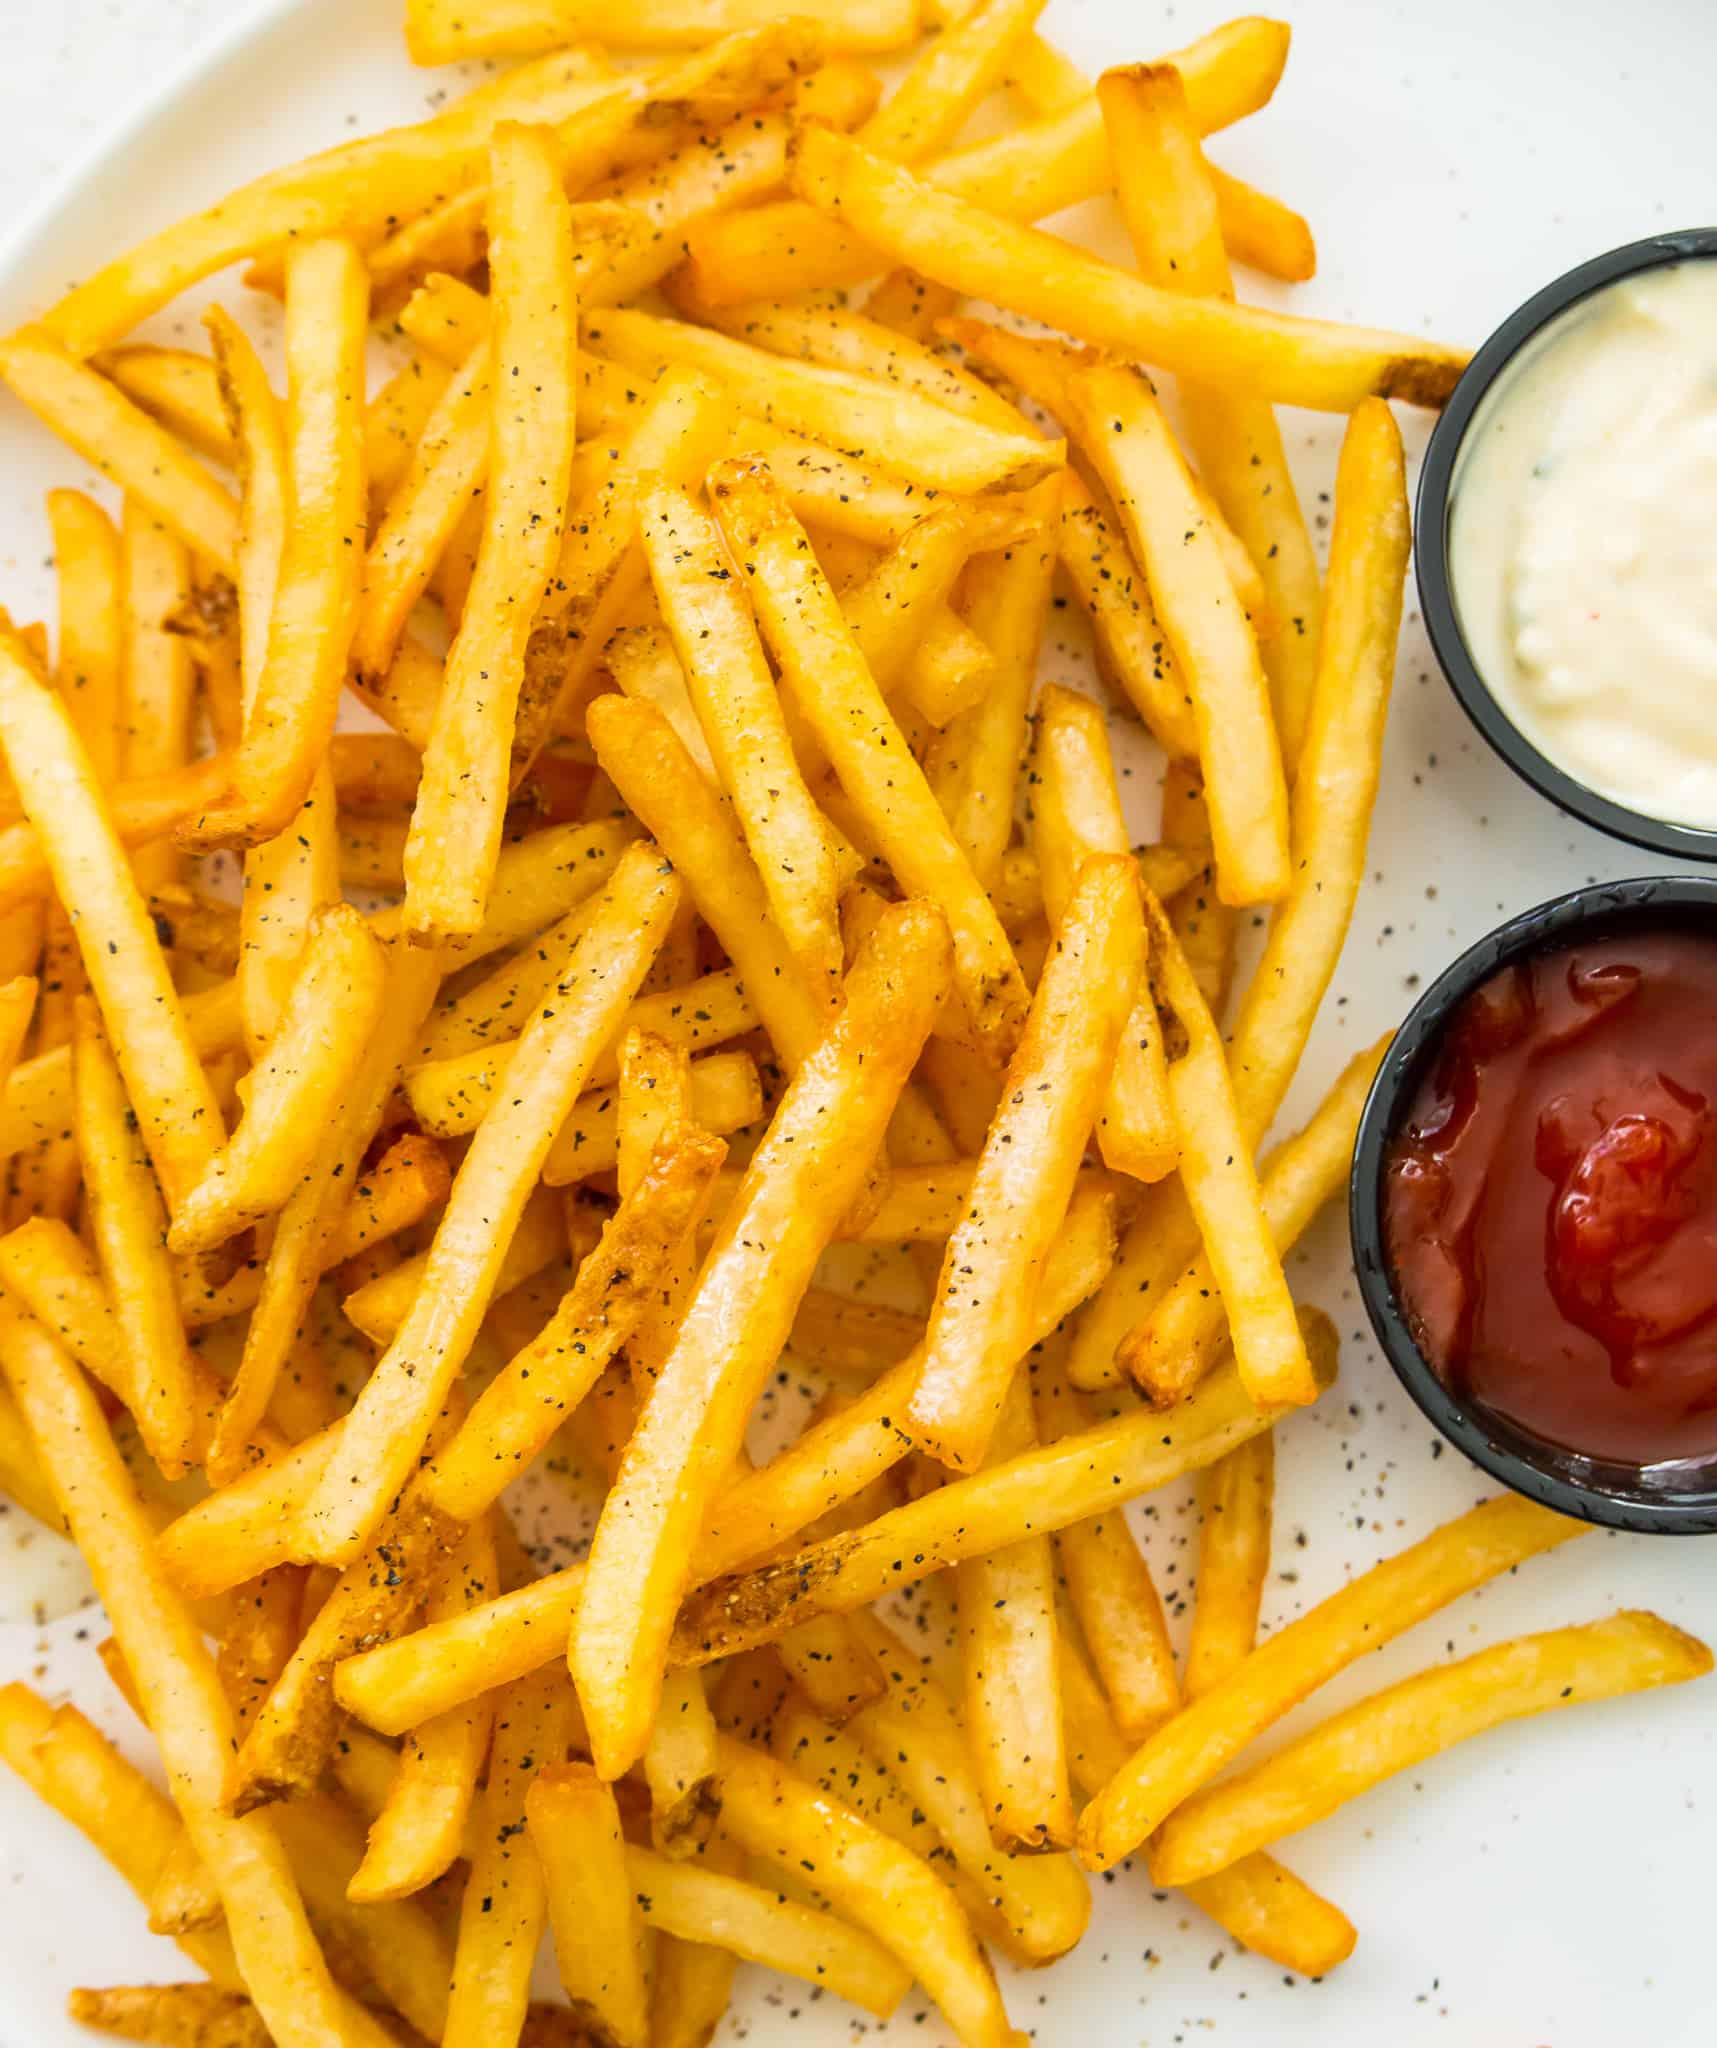 A plate of cooked French fries with ketchup and mayonnaise beside it.